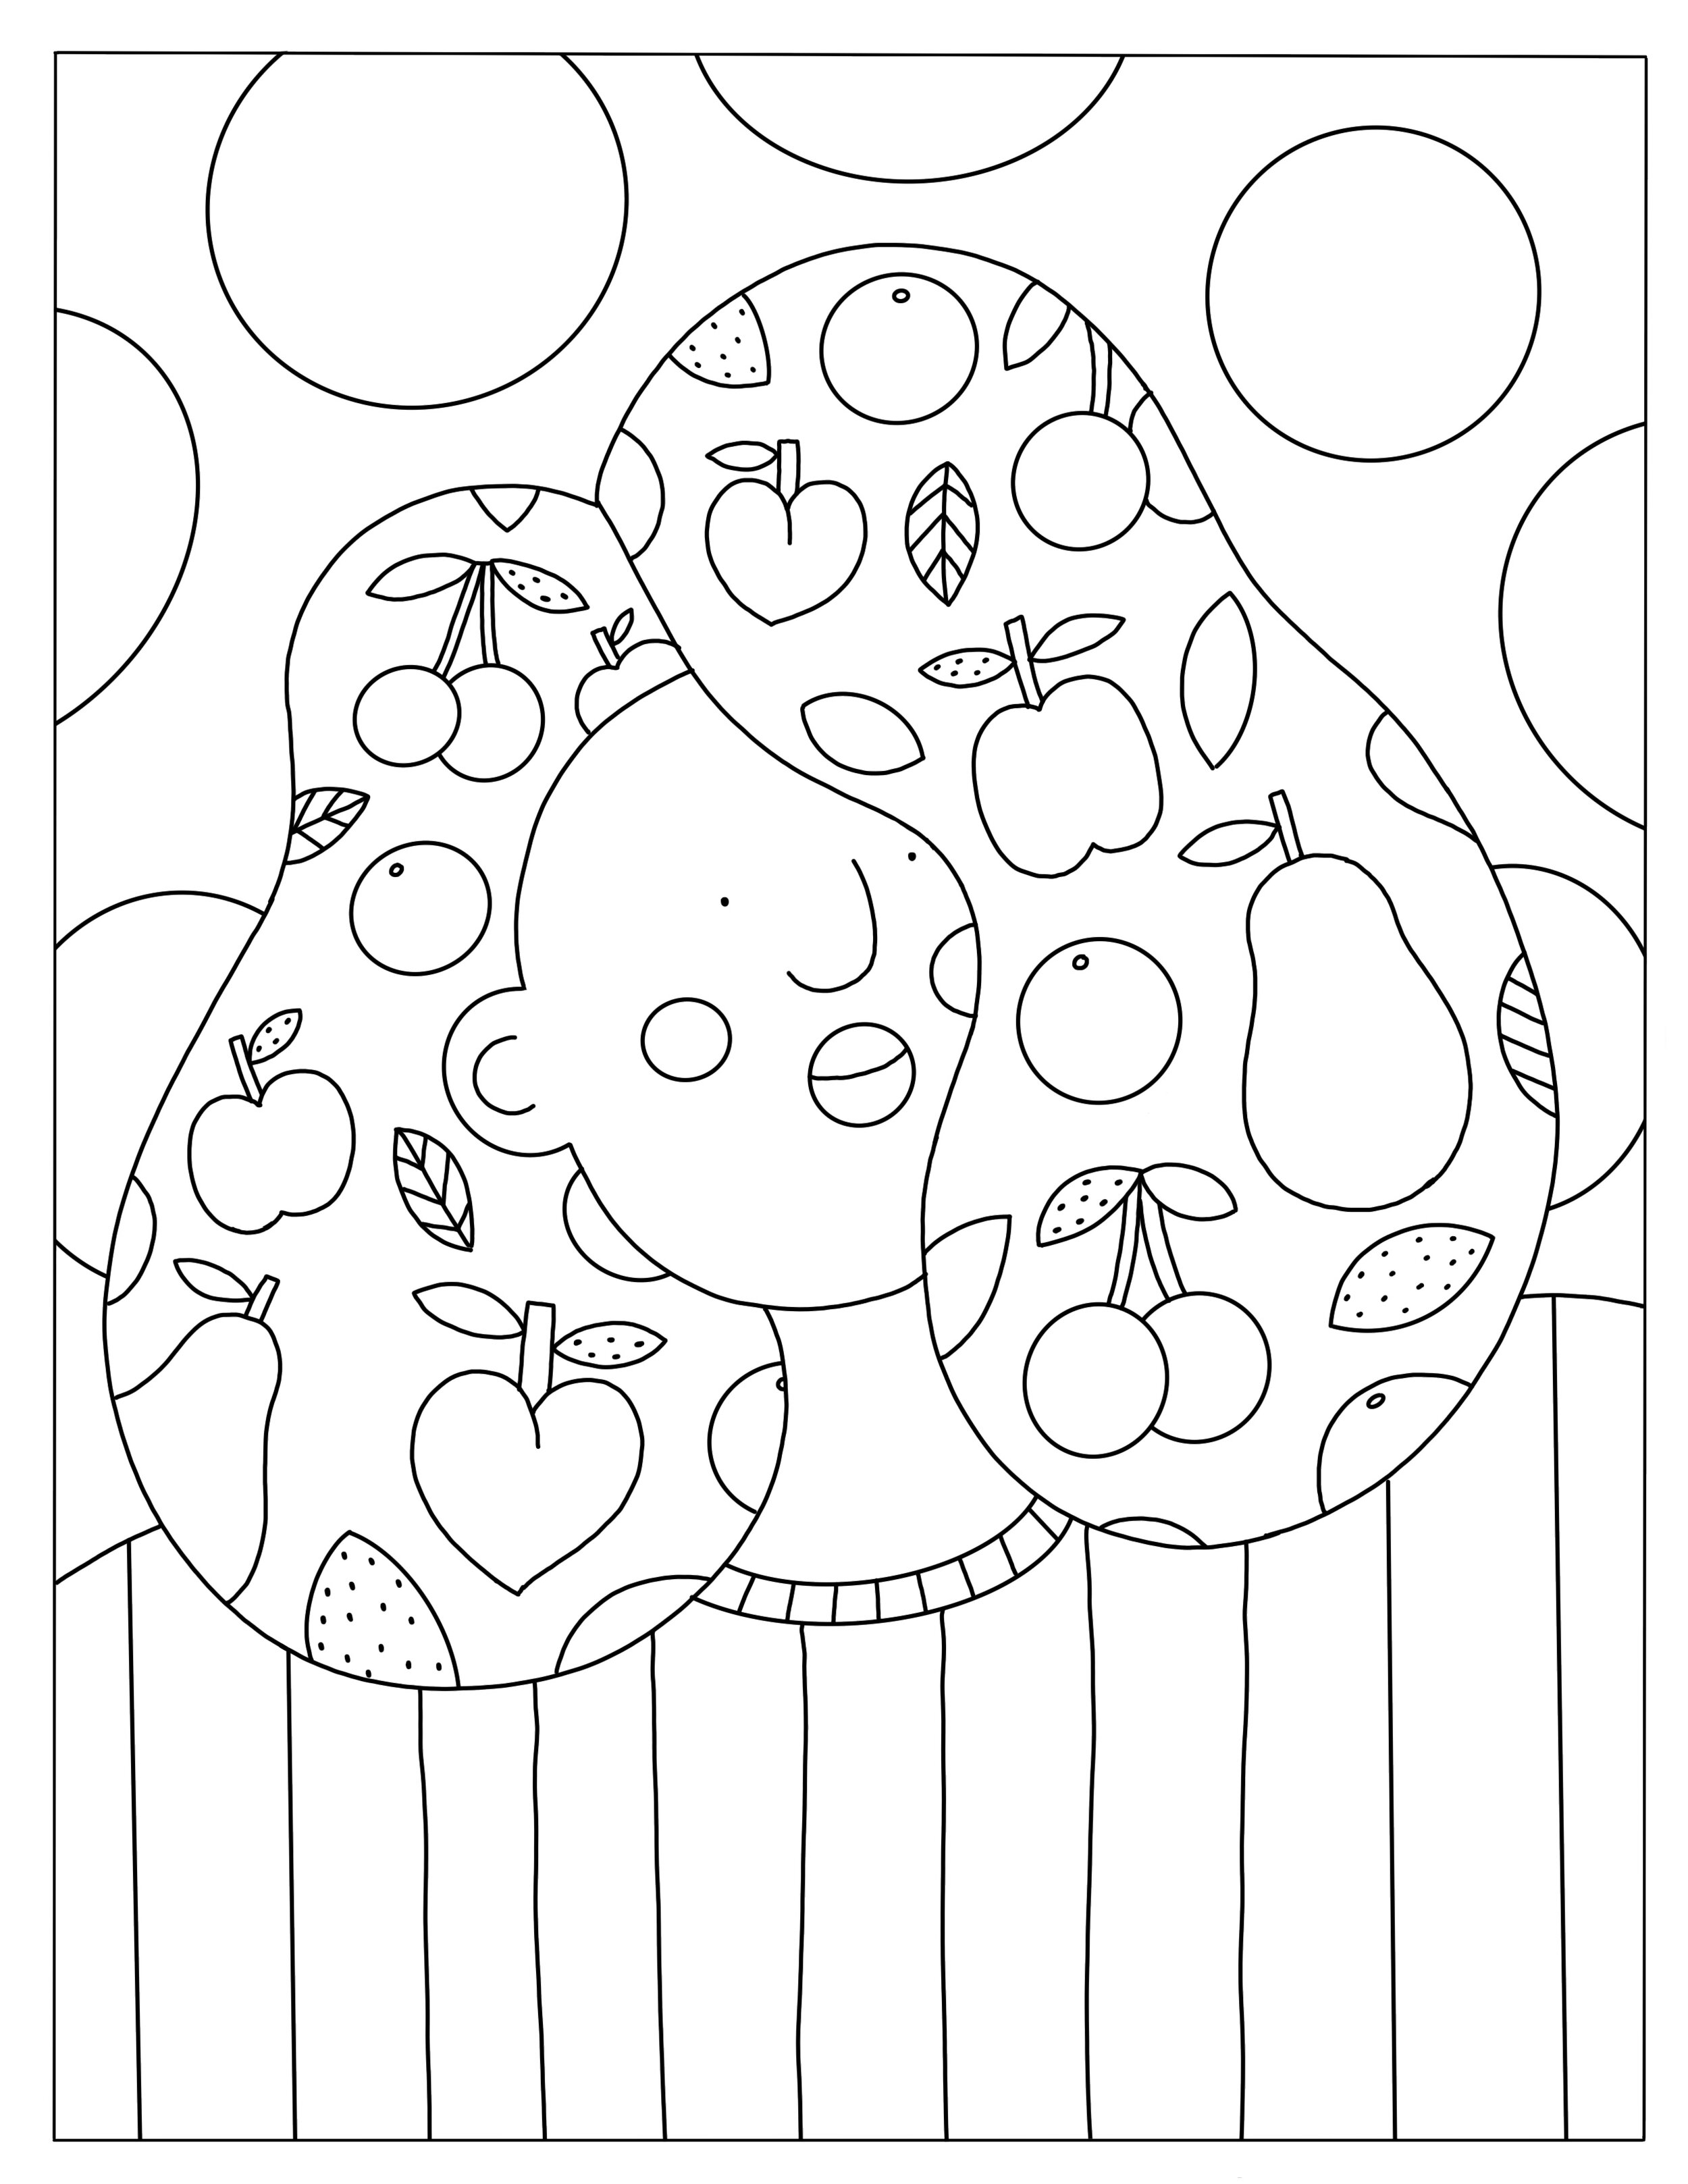 Coloring Pages — Molly Egan Illustration